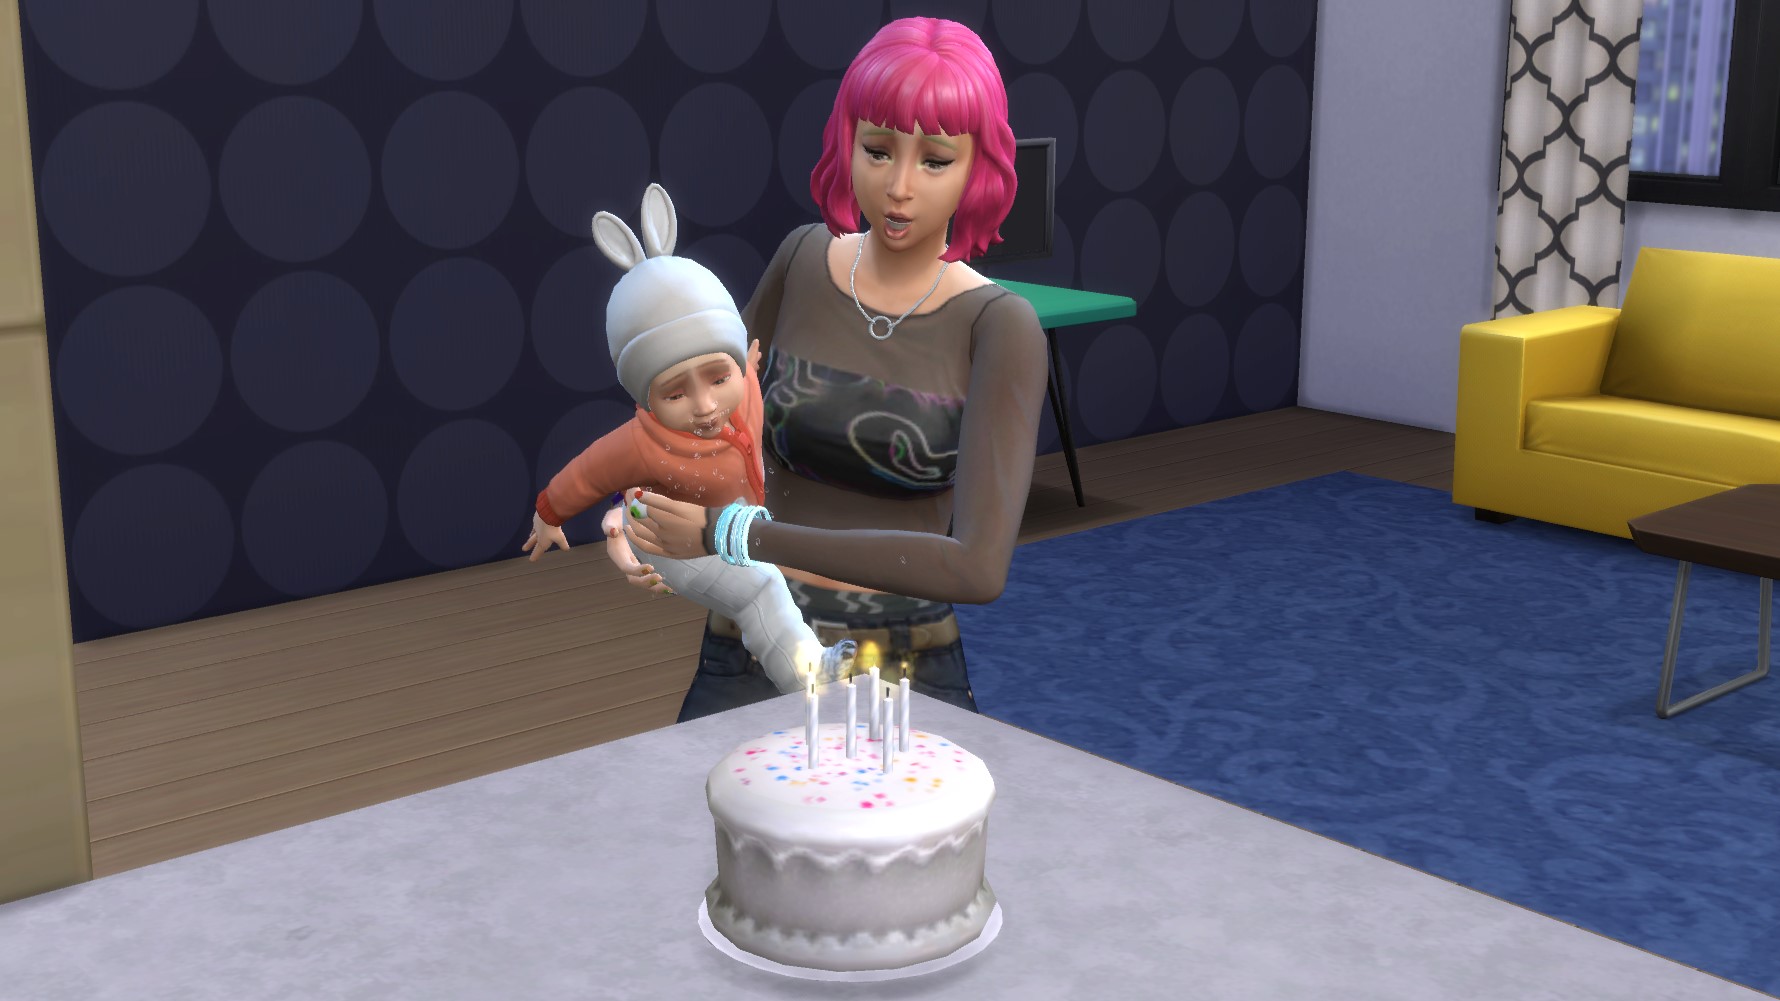  How to age up an infant in The Sims 4 with either a cake or a cheat 